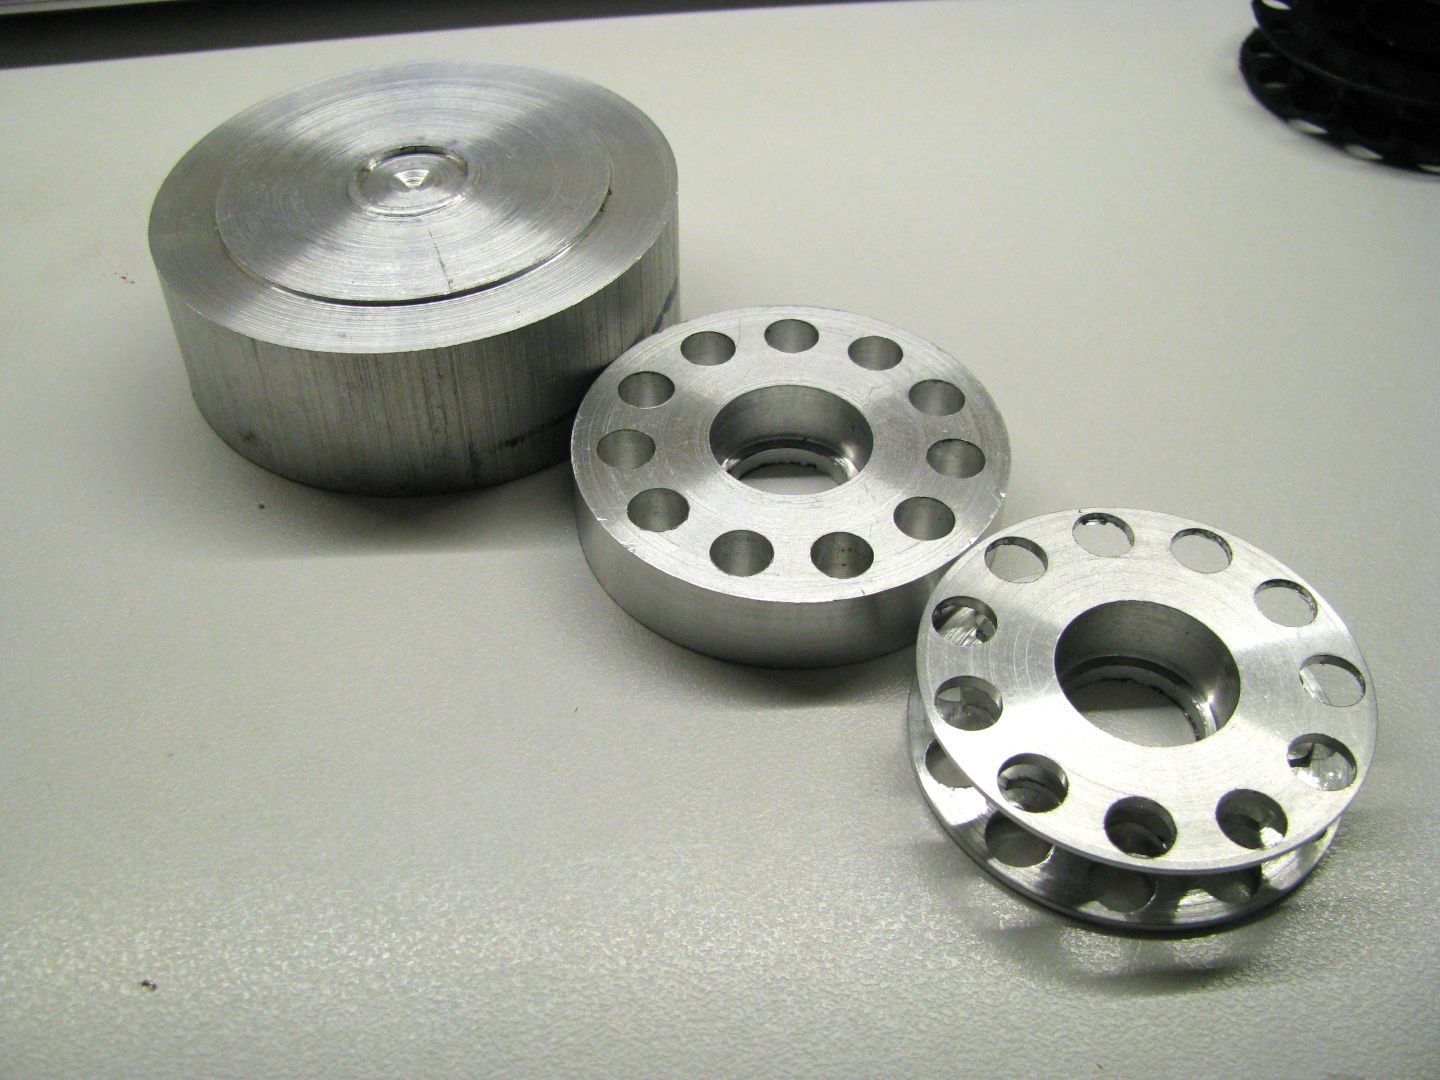 A finished idler sprocket next to a partially completed one and the stock material they were made from.